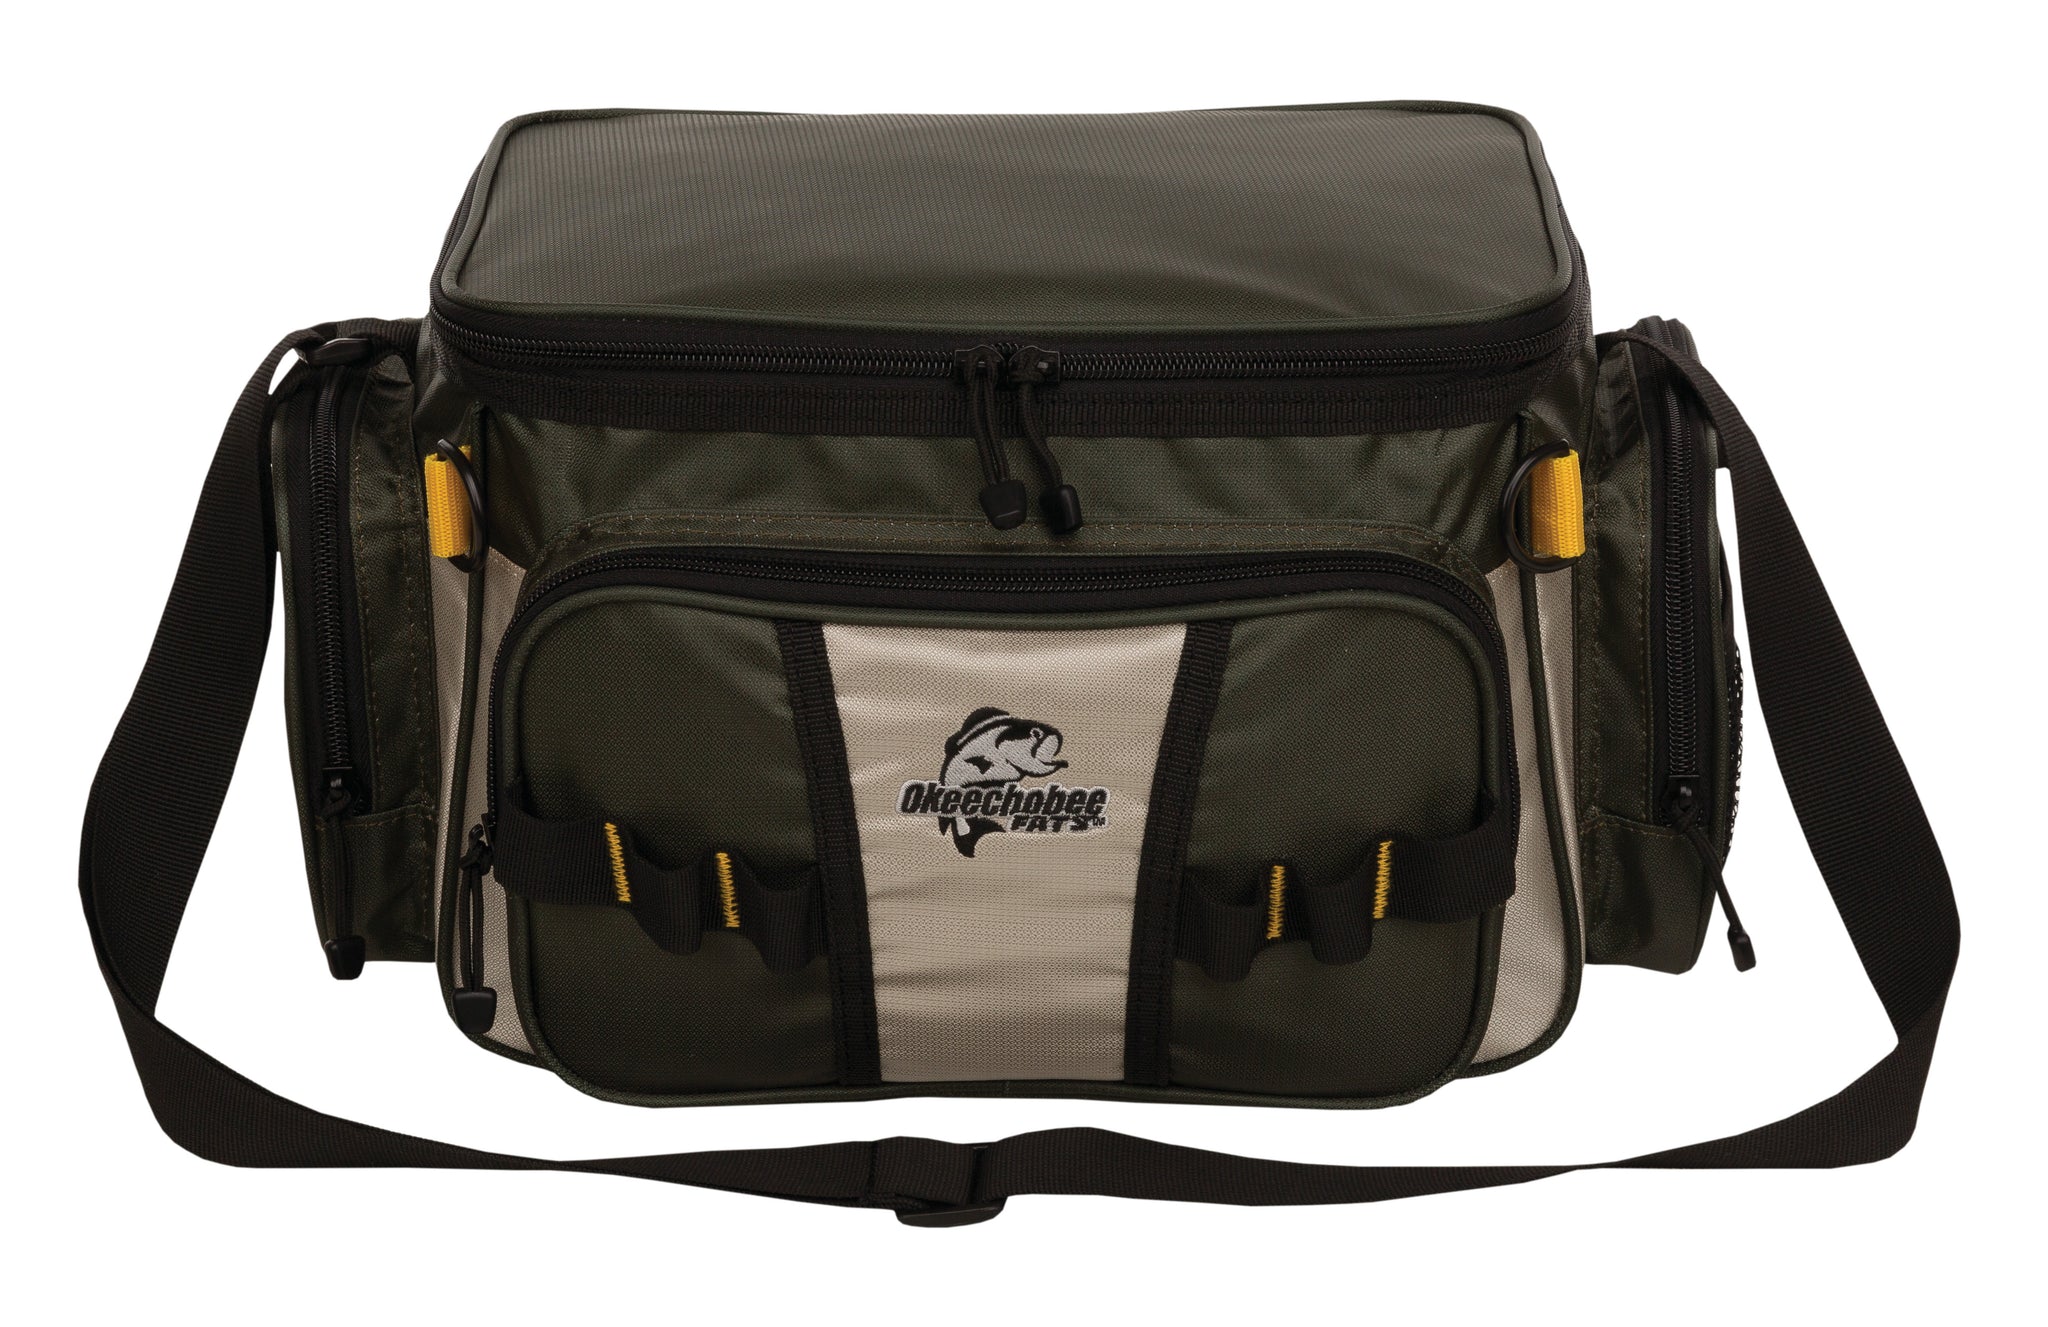 Small Tackle Bag with 2 Utility Boxes – Okeechobee Fats